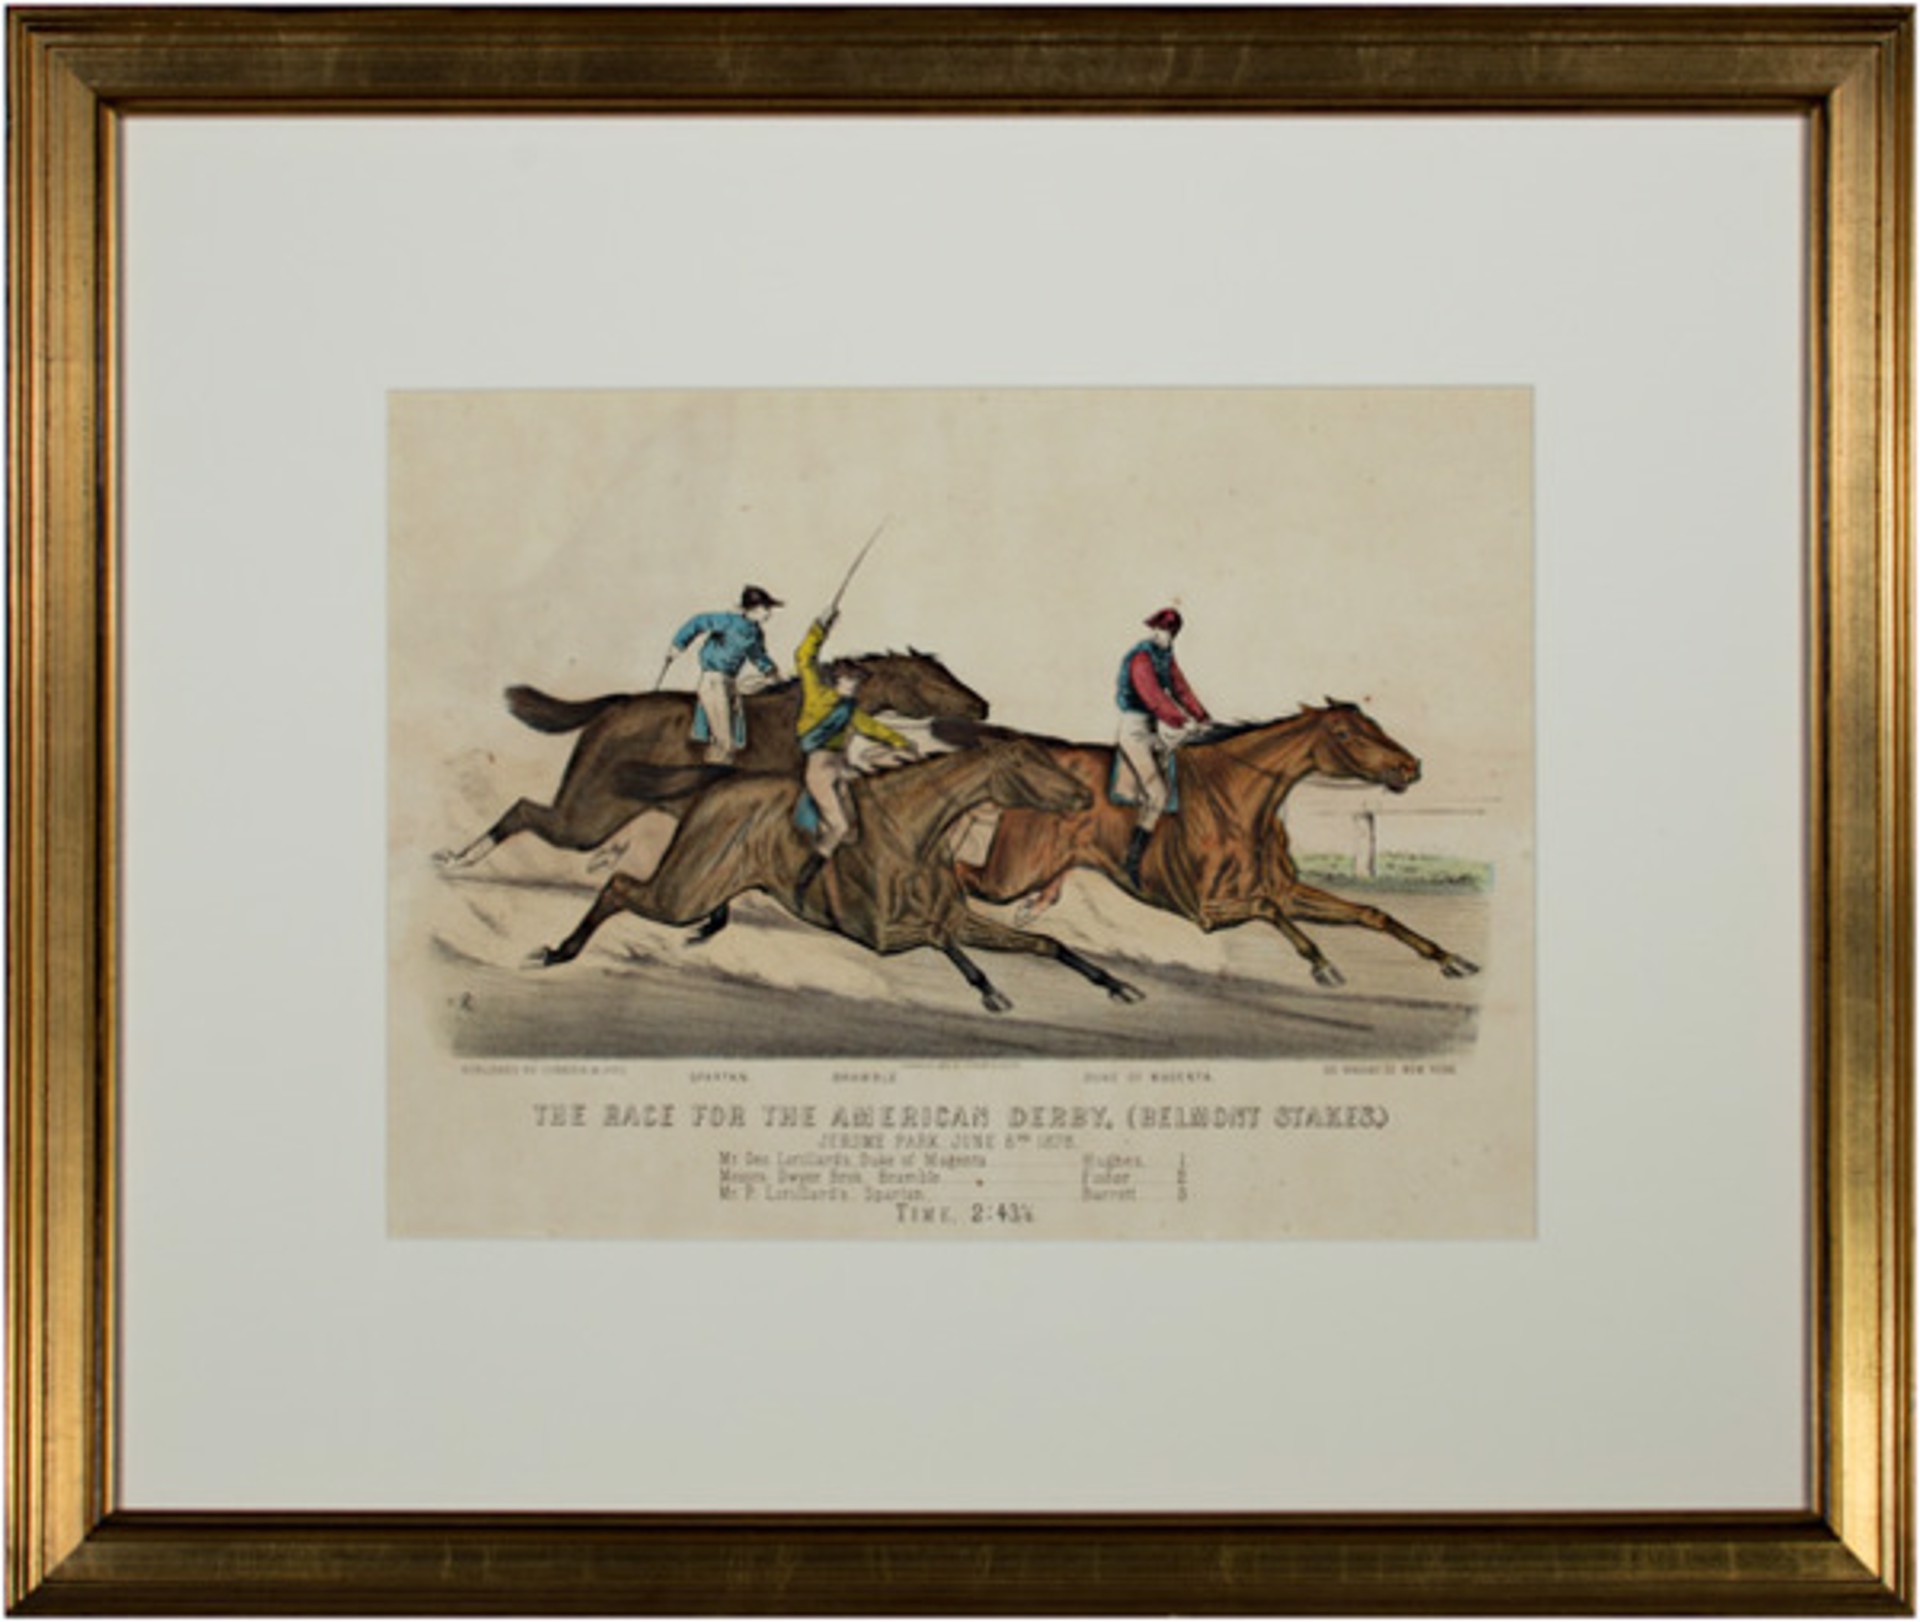 The Race for the American Derby, (Belmont Stakes.) by Currier & Ives